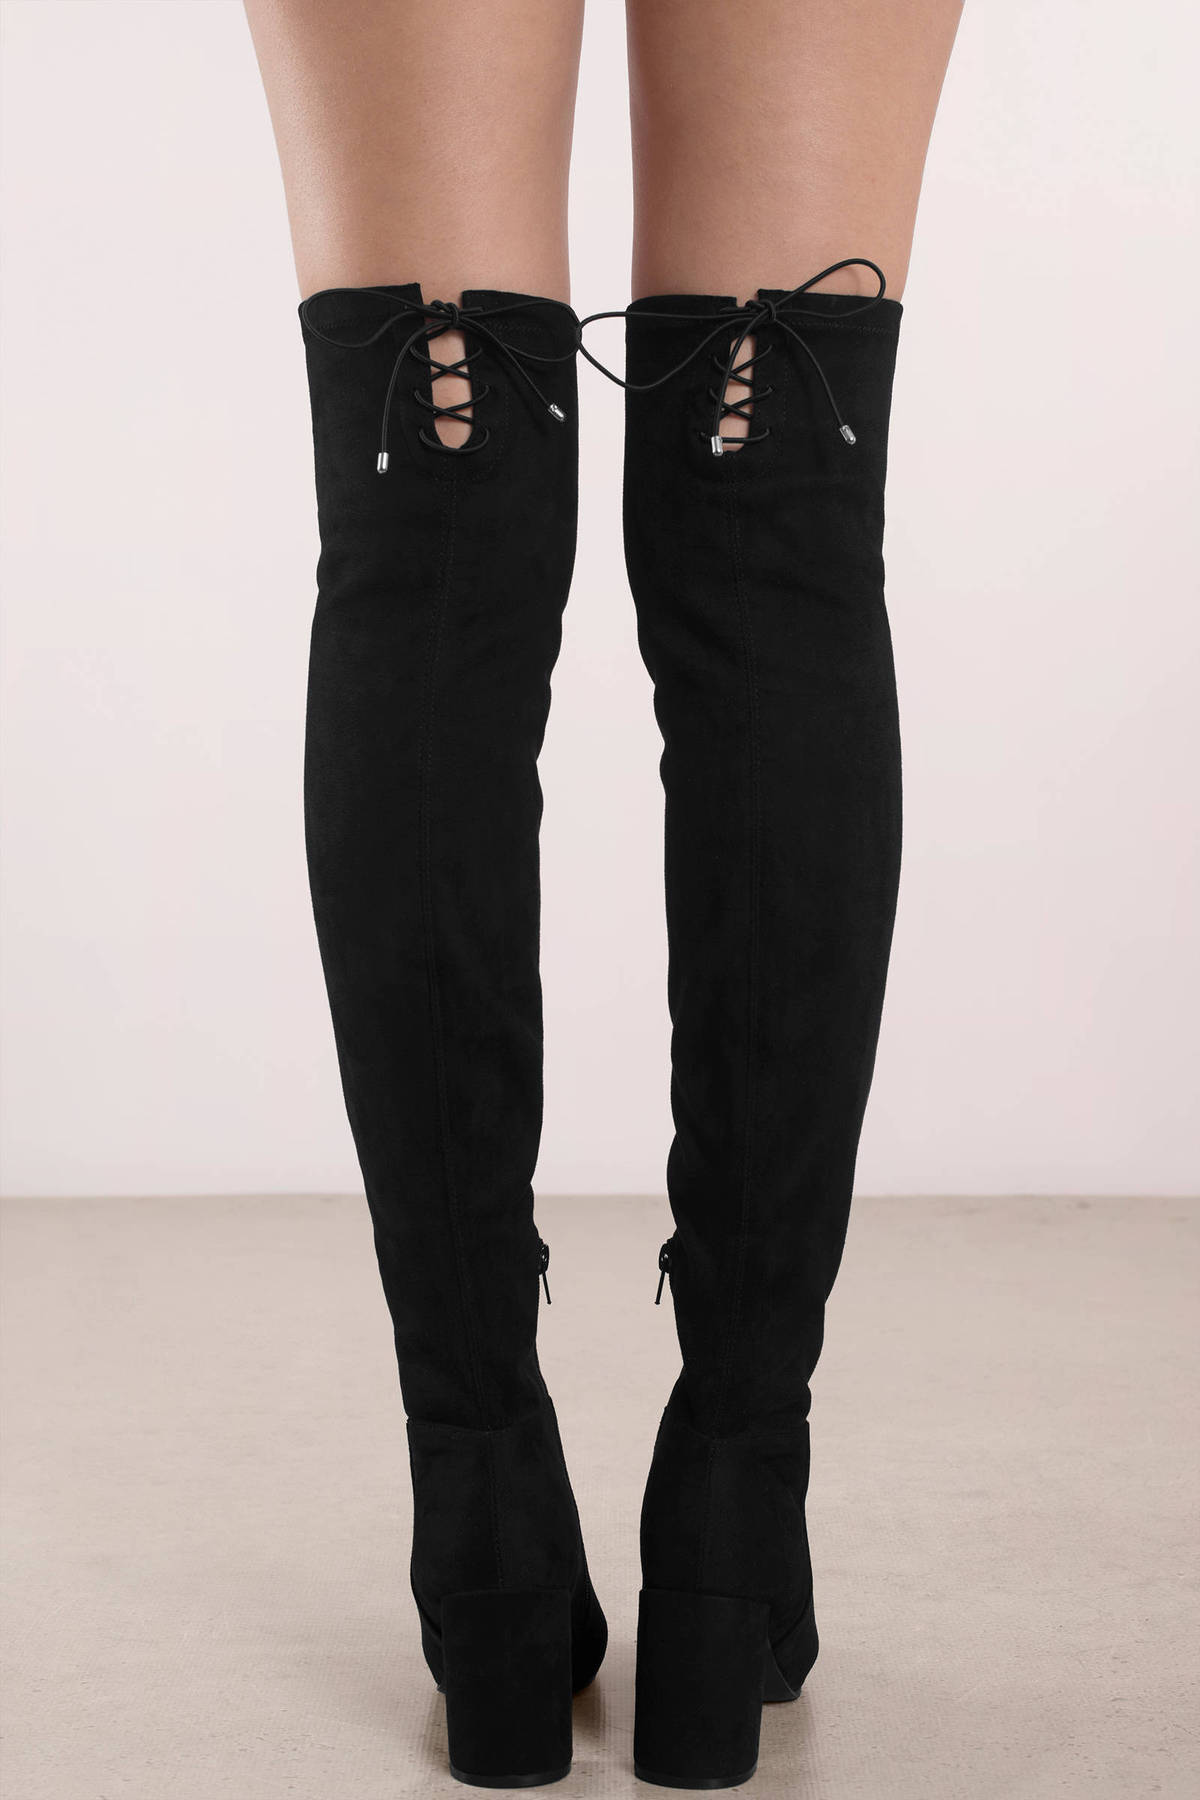 Krush Suede Thigh High Boots in Black - $50 | Tobi US